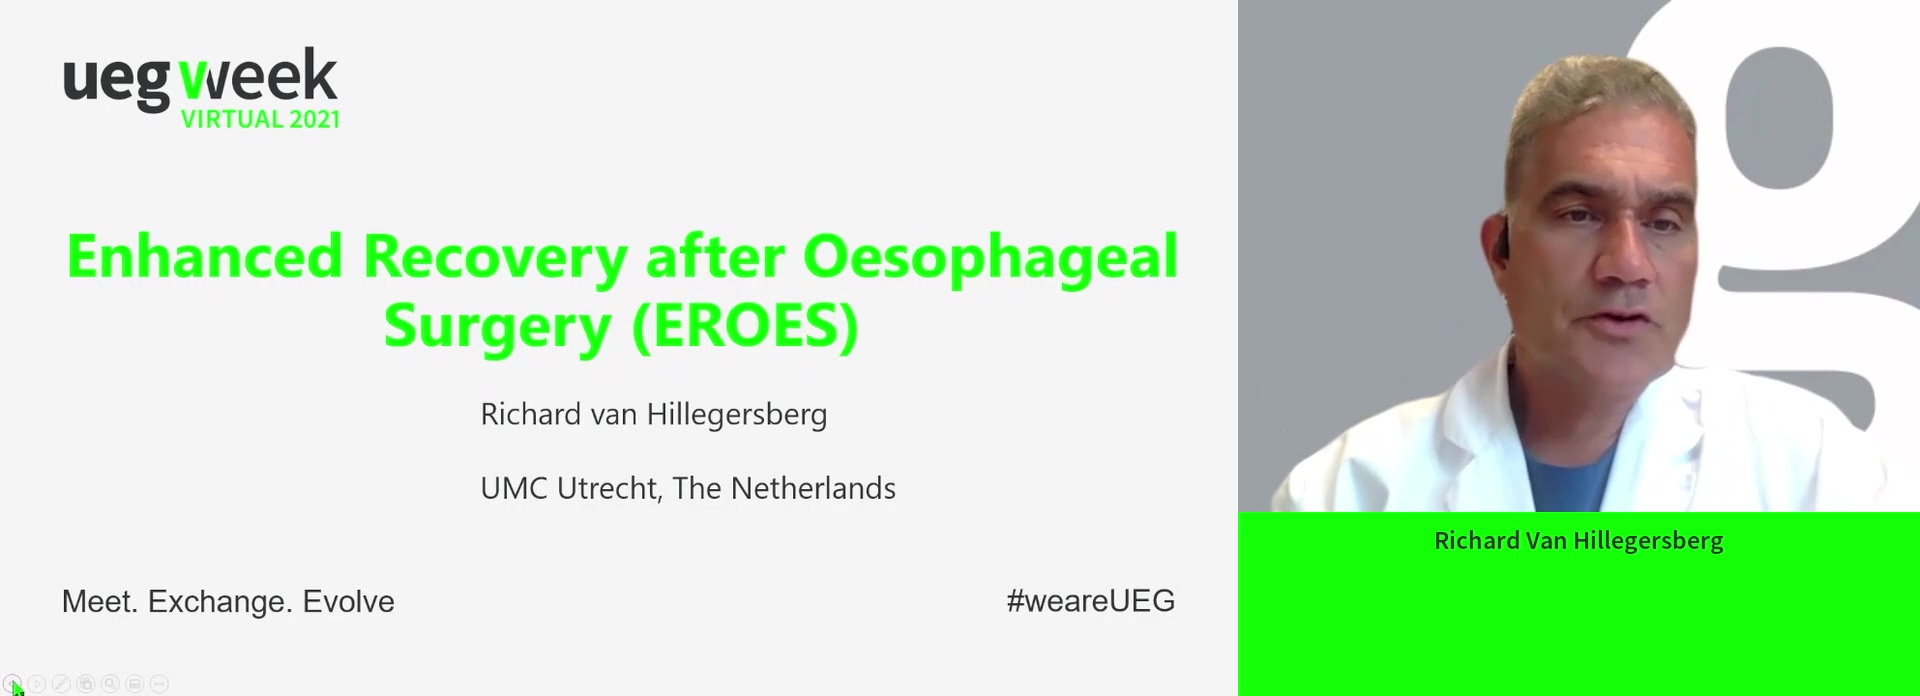 Enhanced recovery after surgery (ERAS) after esophagectomy